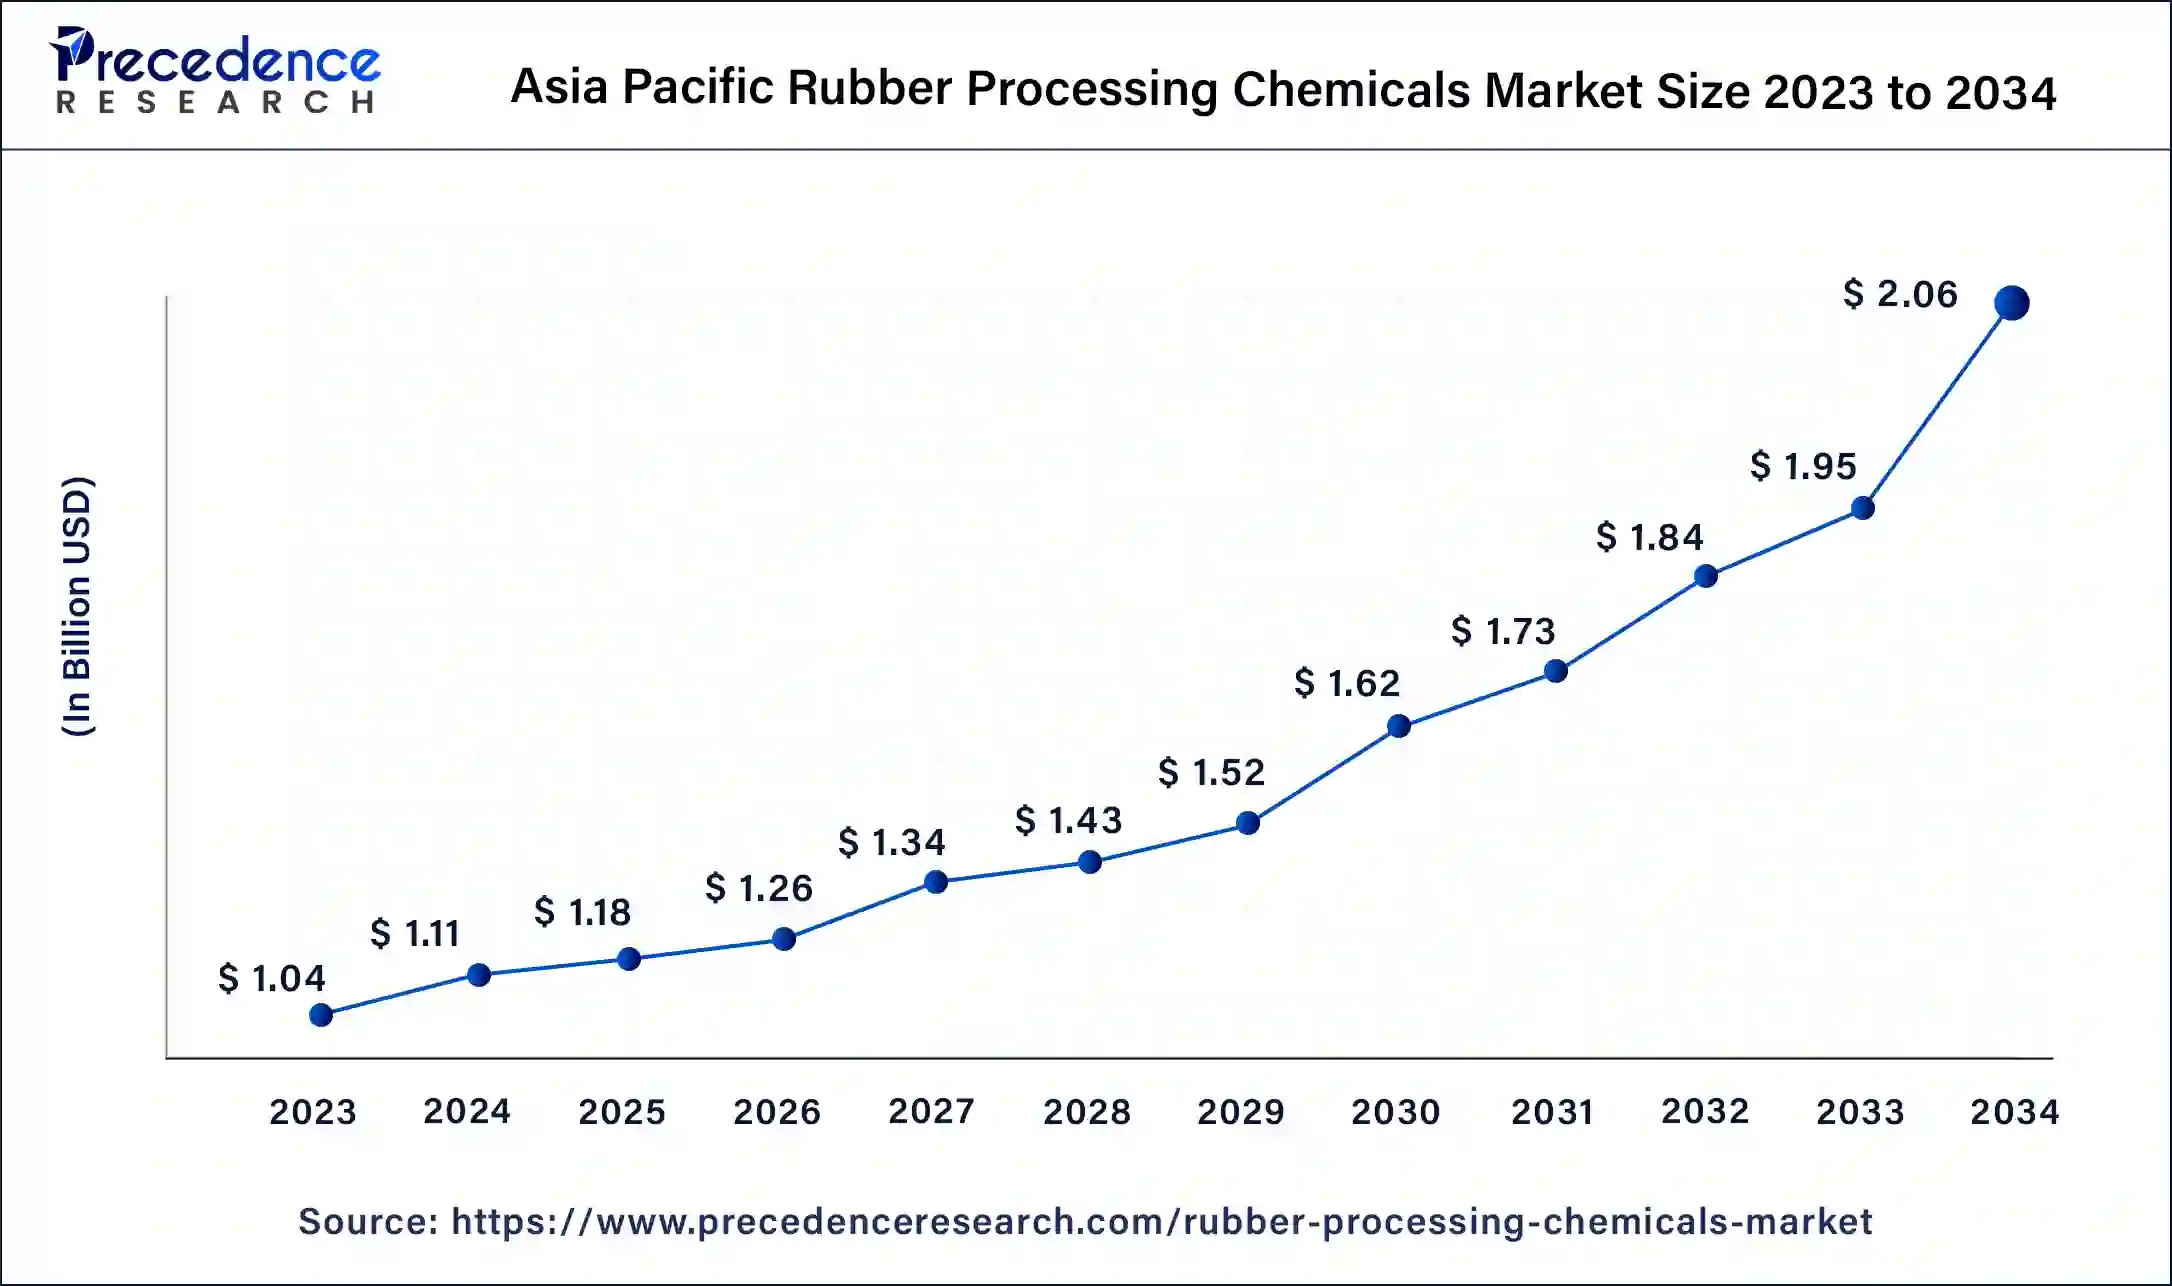 Asia Pacific Rubber Processing Chemicals Market Size 2024 to 2034